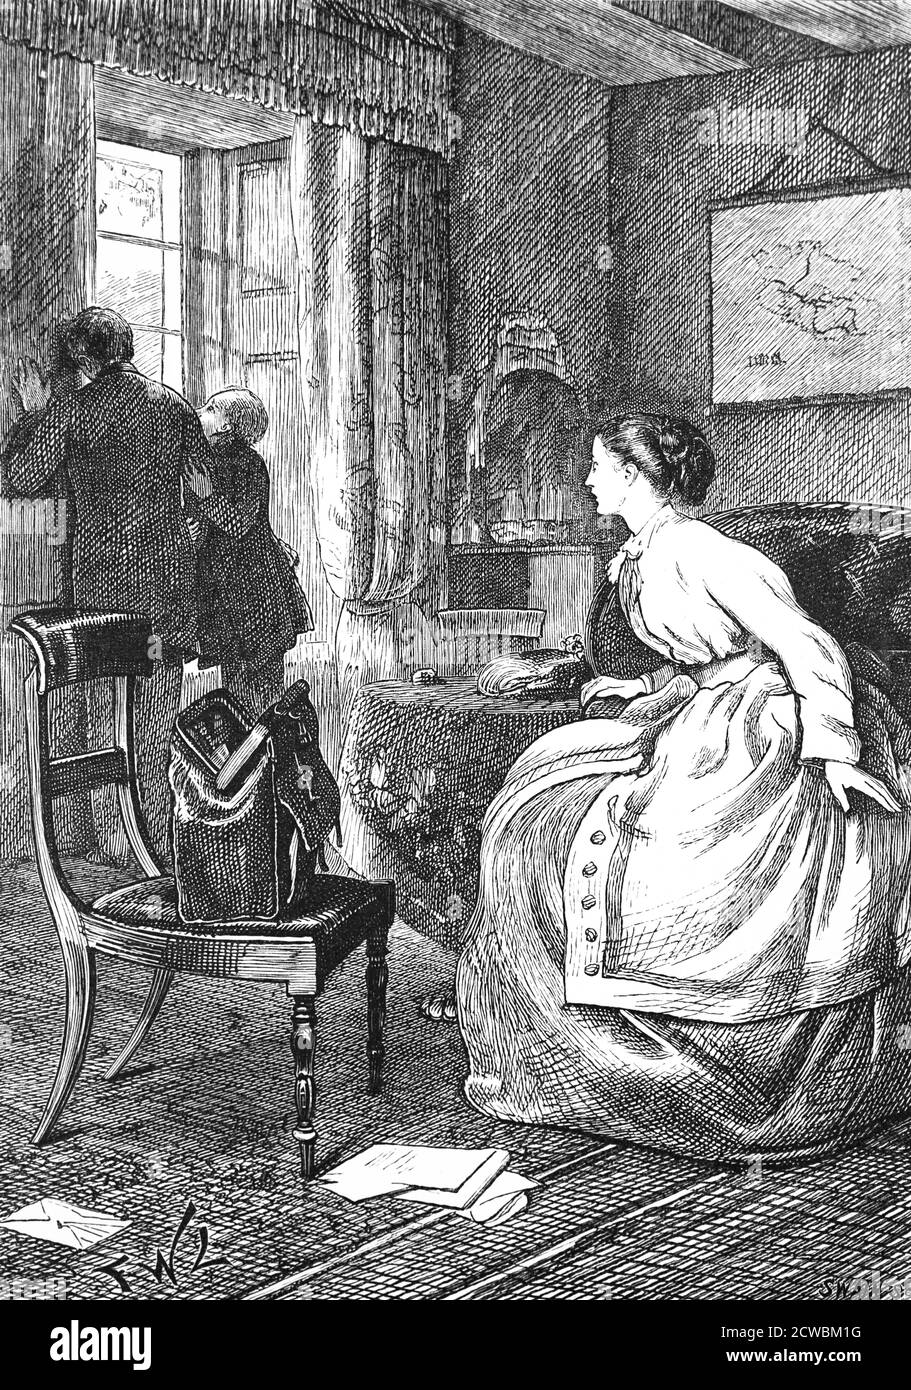 Engraving depicting a Gladstone bag, a small portmanteau suitcase built  over a rigid frame which could separate into two equal sections. The bags  are named after former British Prime Minister William Ewart